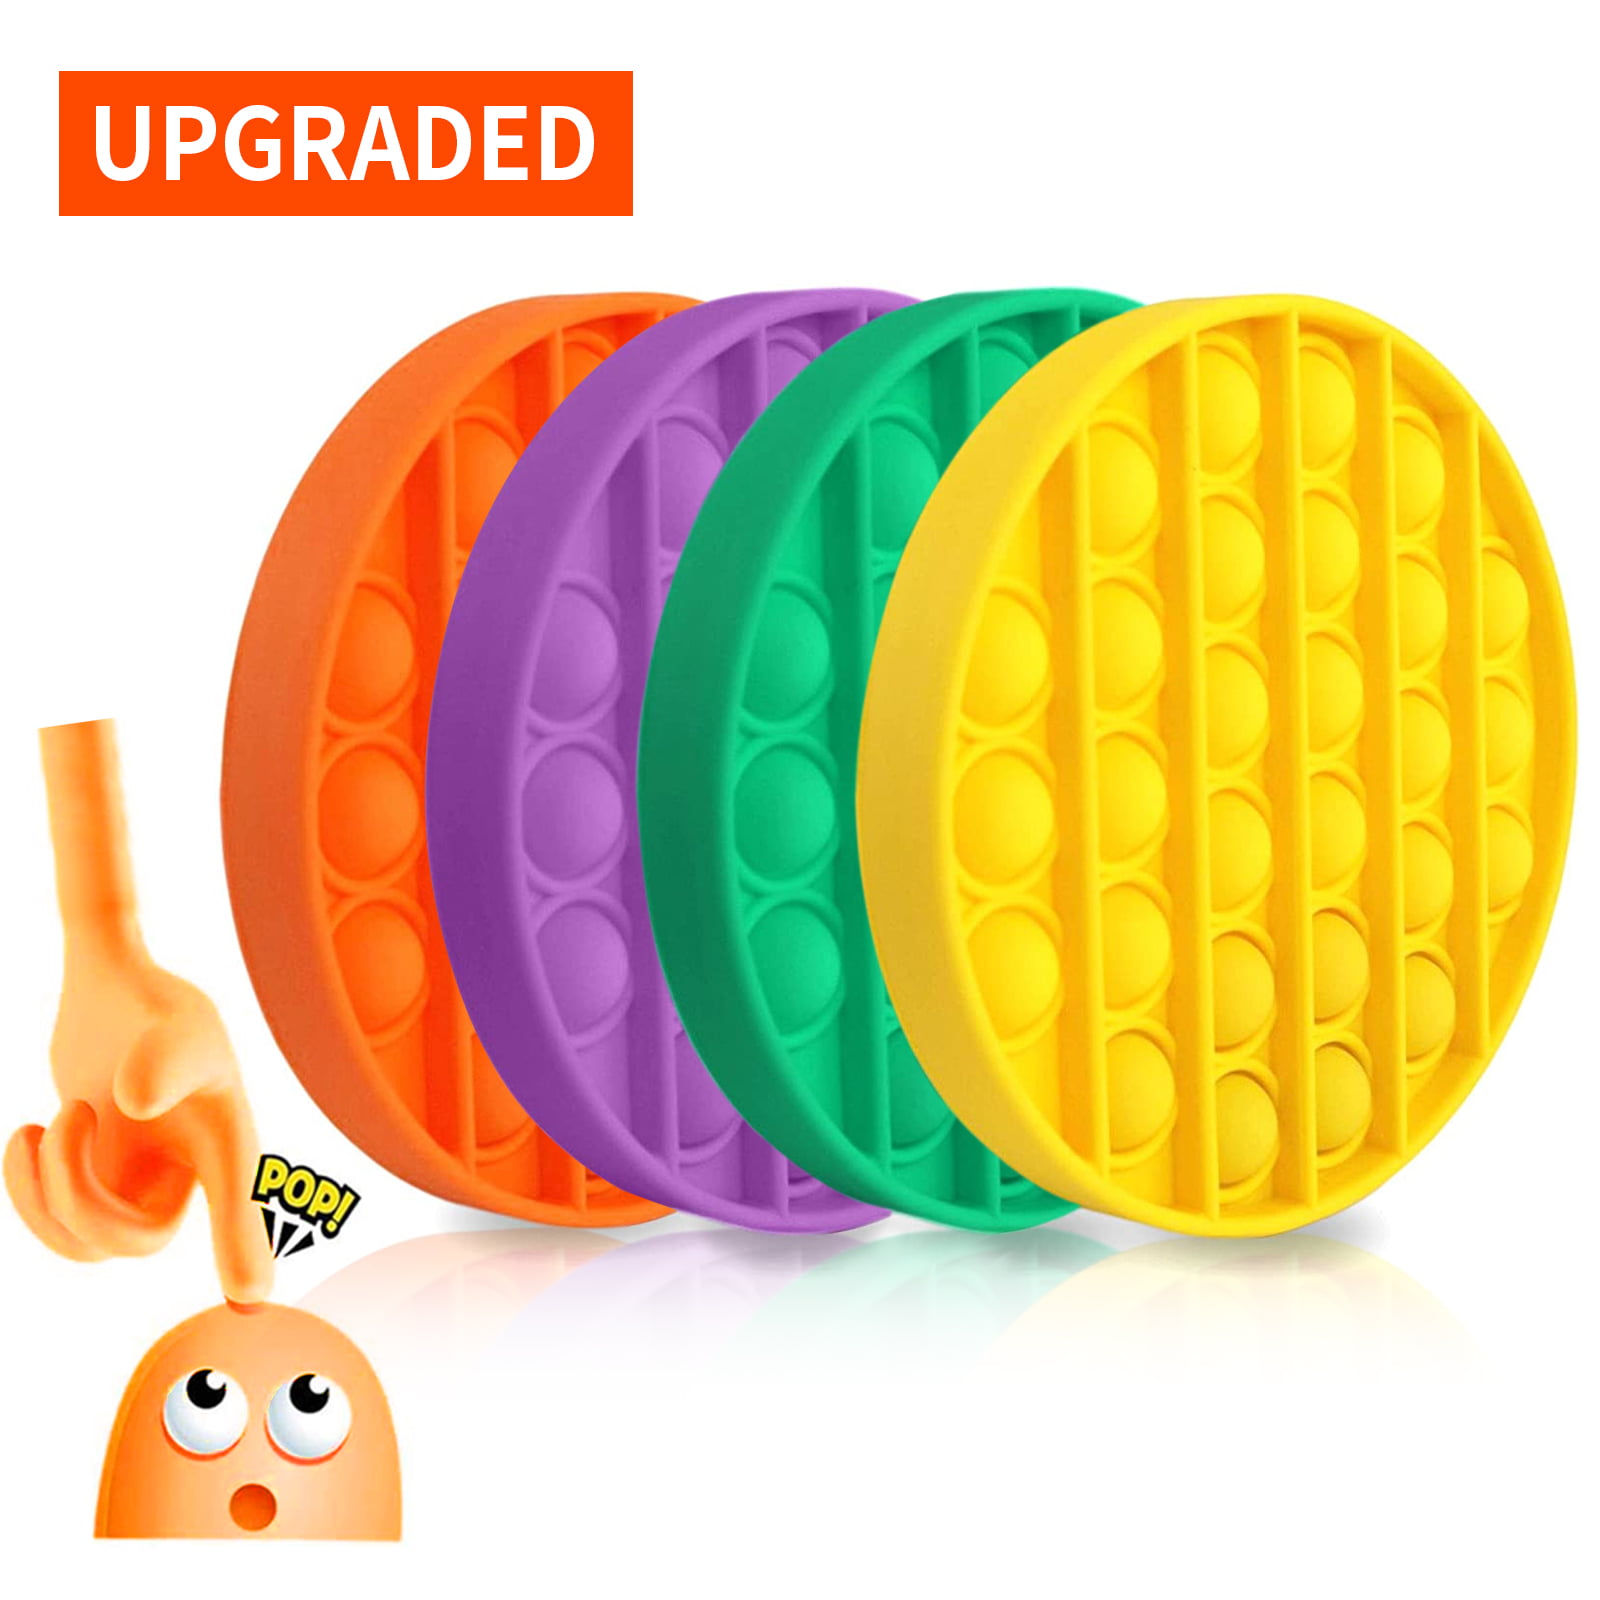 4PCS Push Popop Bubble Fidget Toy,Popping Game,Poke Pop Toys for Needs Stress/Anxiety Relief,Silicone Squeeze Anti-Anxiety Tools for Kids and Adults